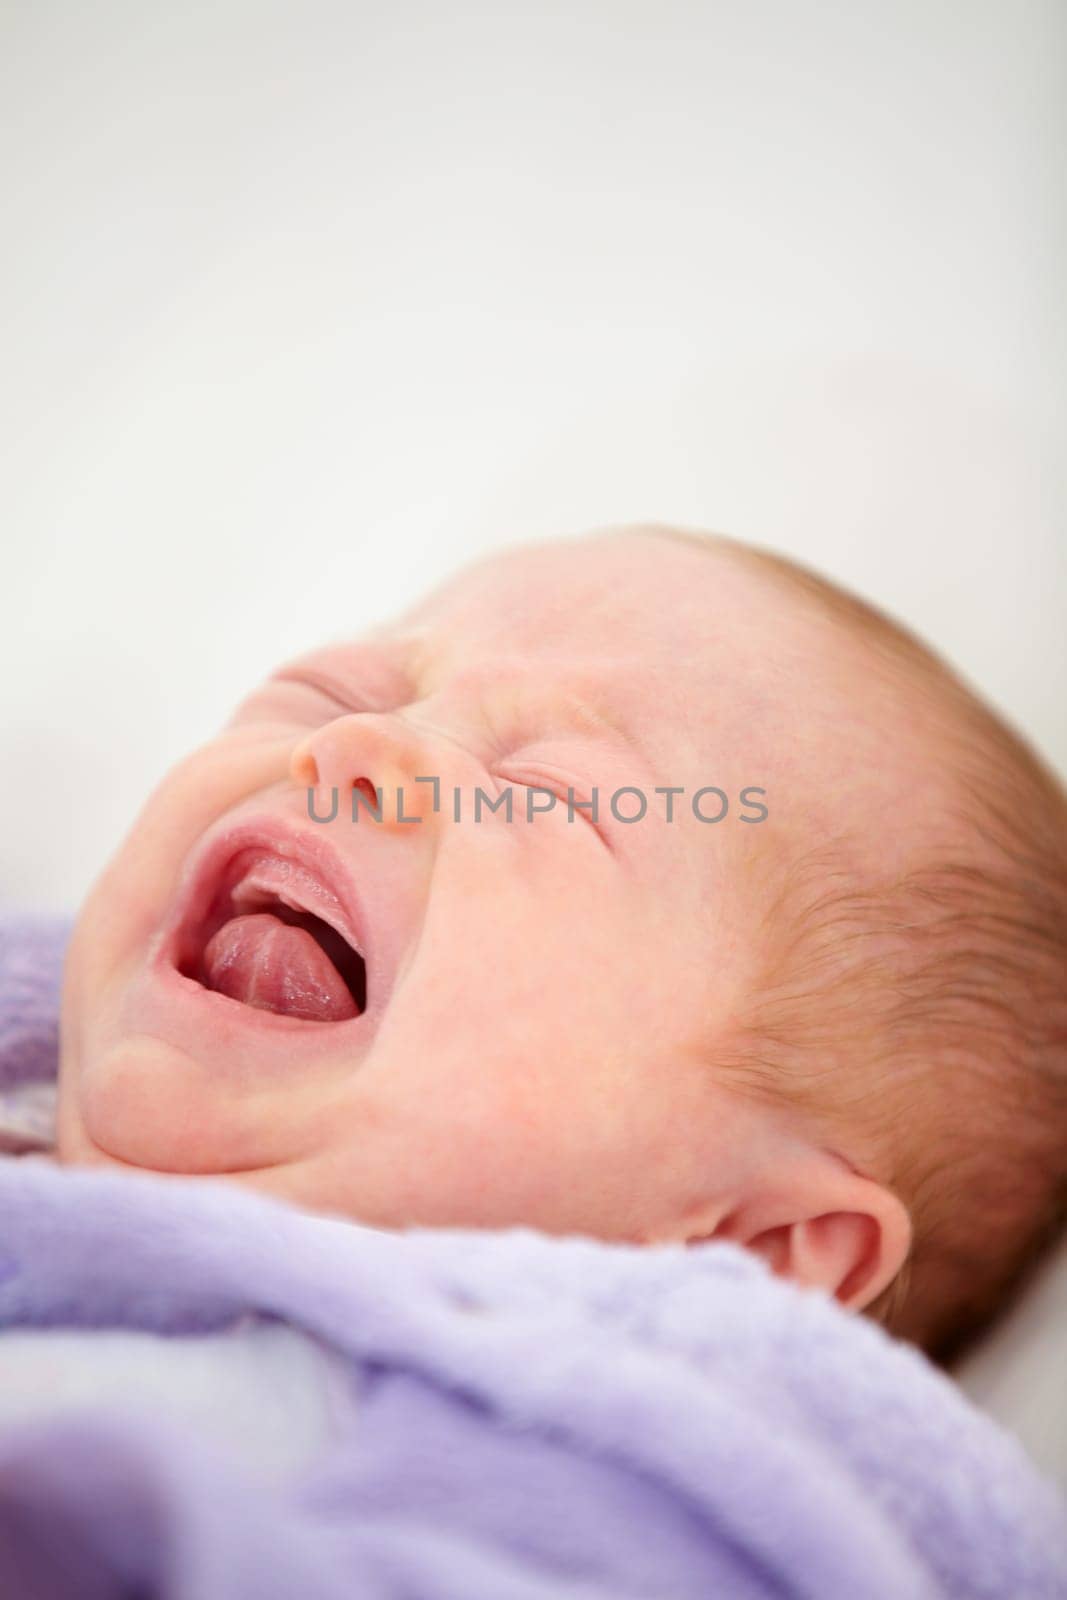 Sad, crying or tantrum with a baby on a bed closeup in a home for emotion, expression or child development. Face, tired or hungry with a newborn infant in the bedroom of an apartment for growth.